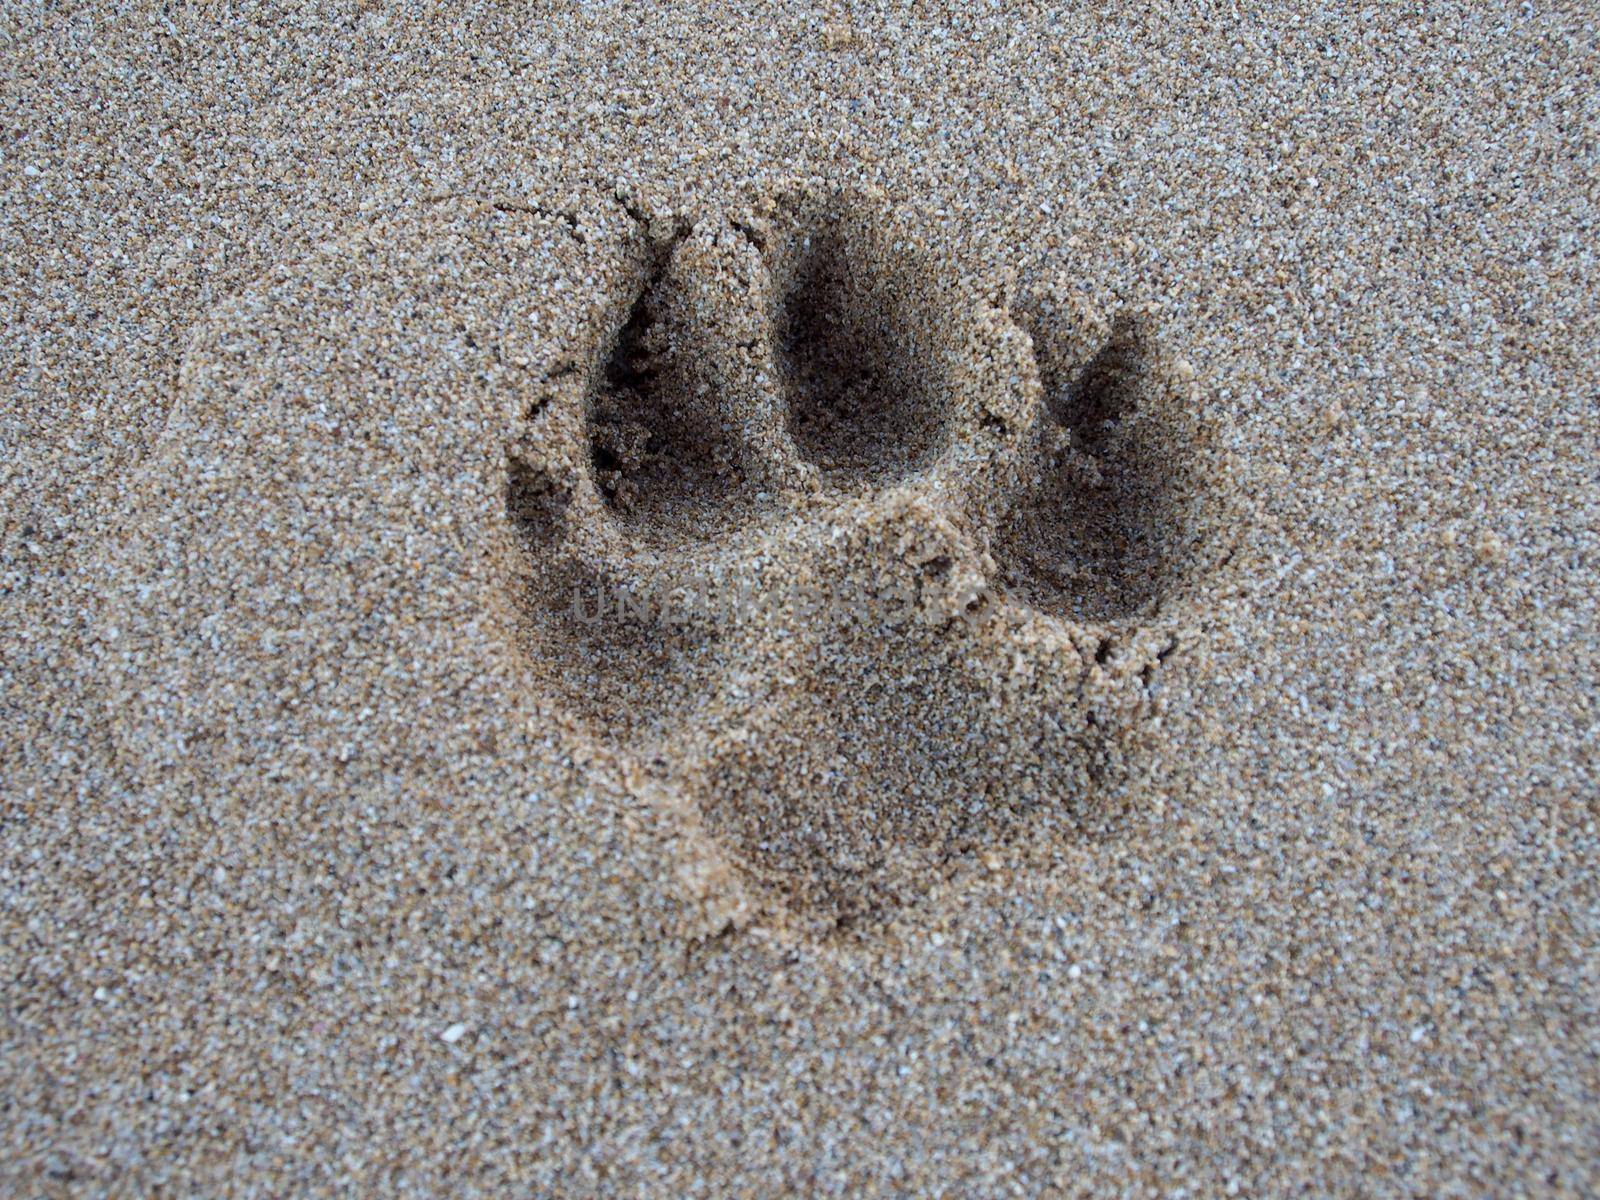 Large Dog Paw Print in the Sand